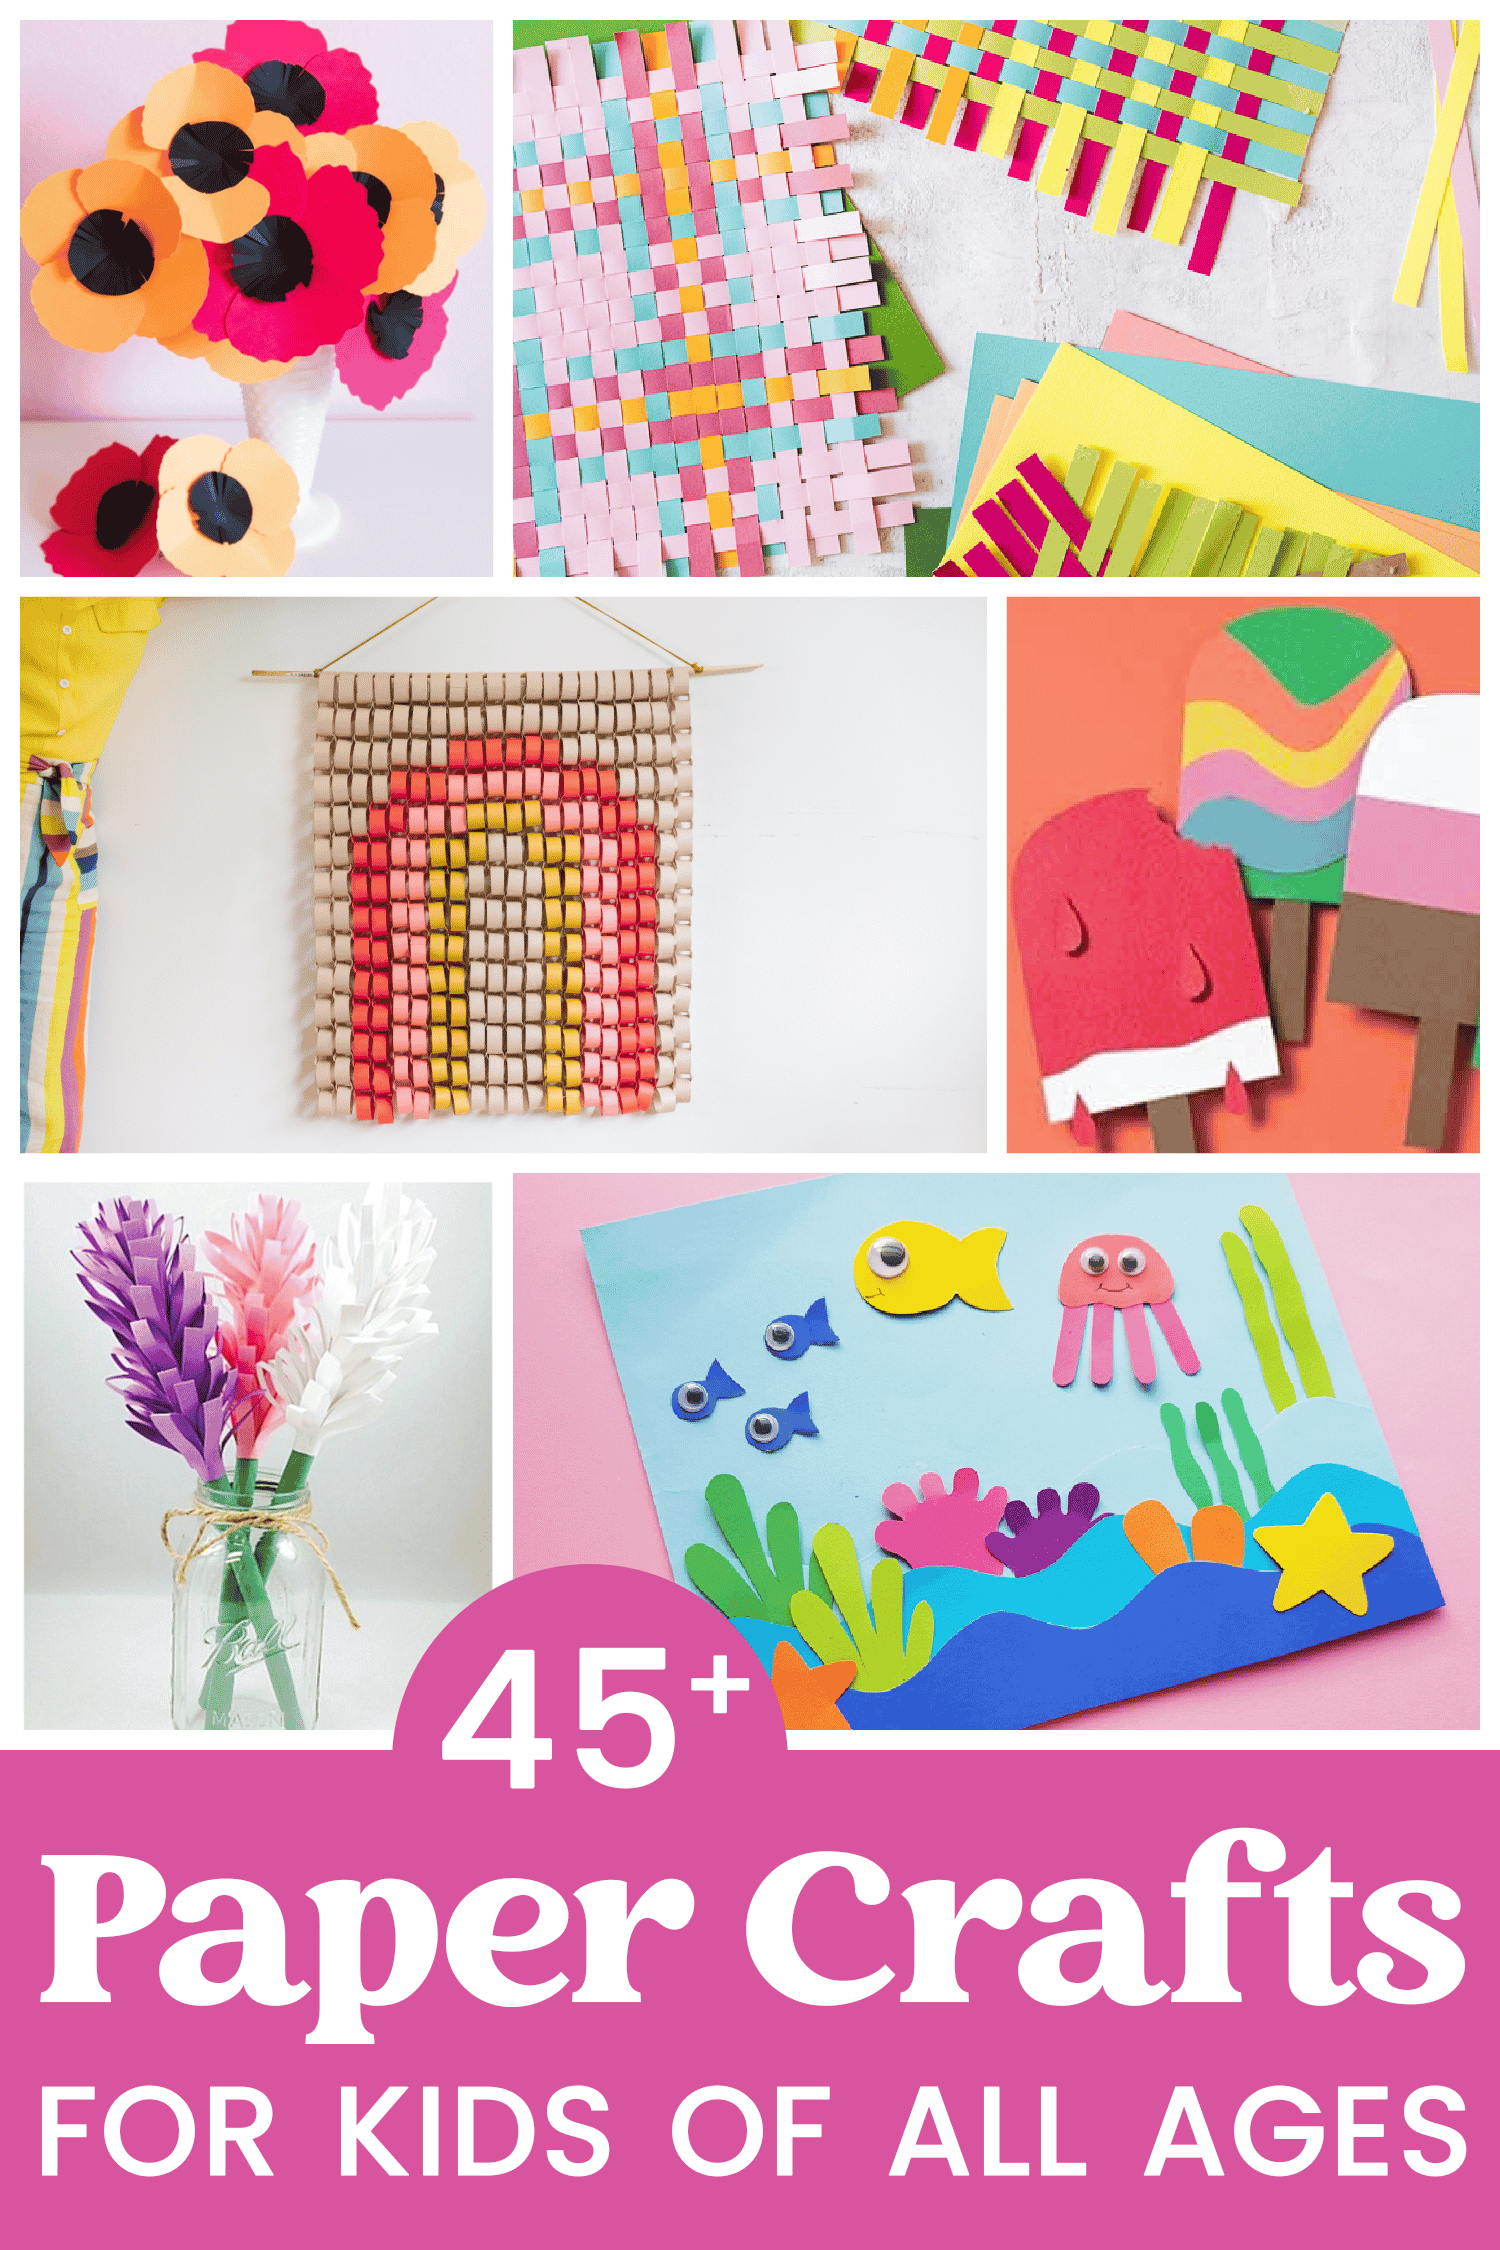 Crafts For Kids - Tons of Art and Craft Ideas for Kids to Make - Easy Peasy  and Fun